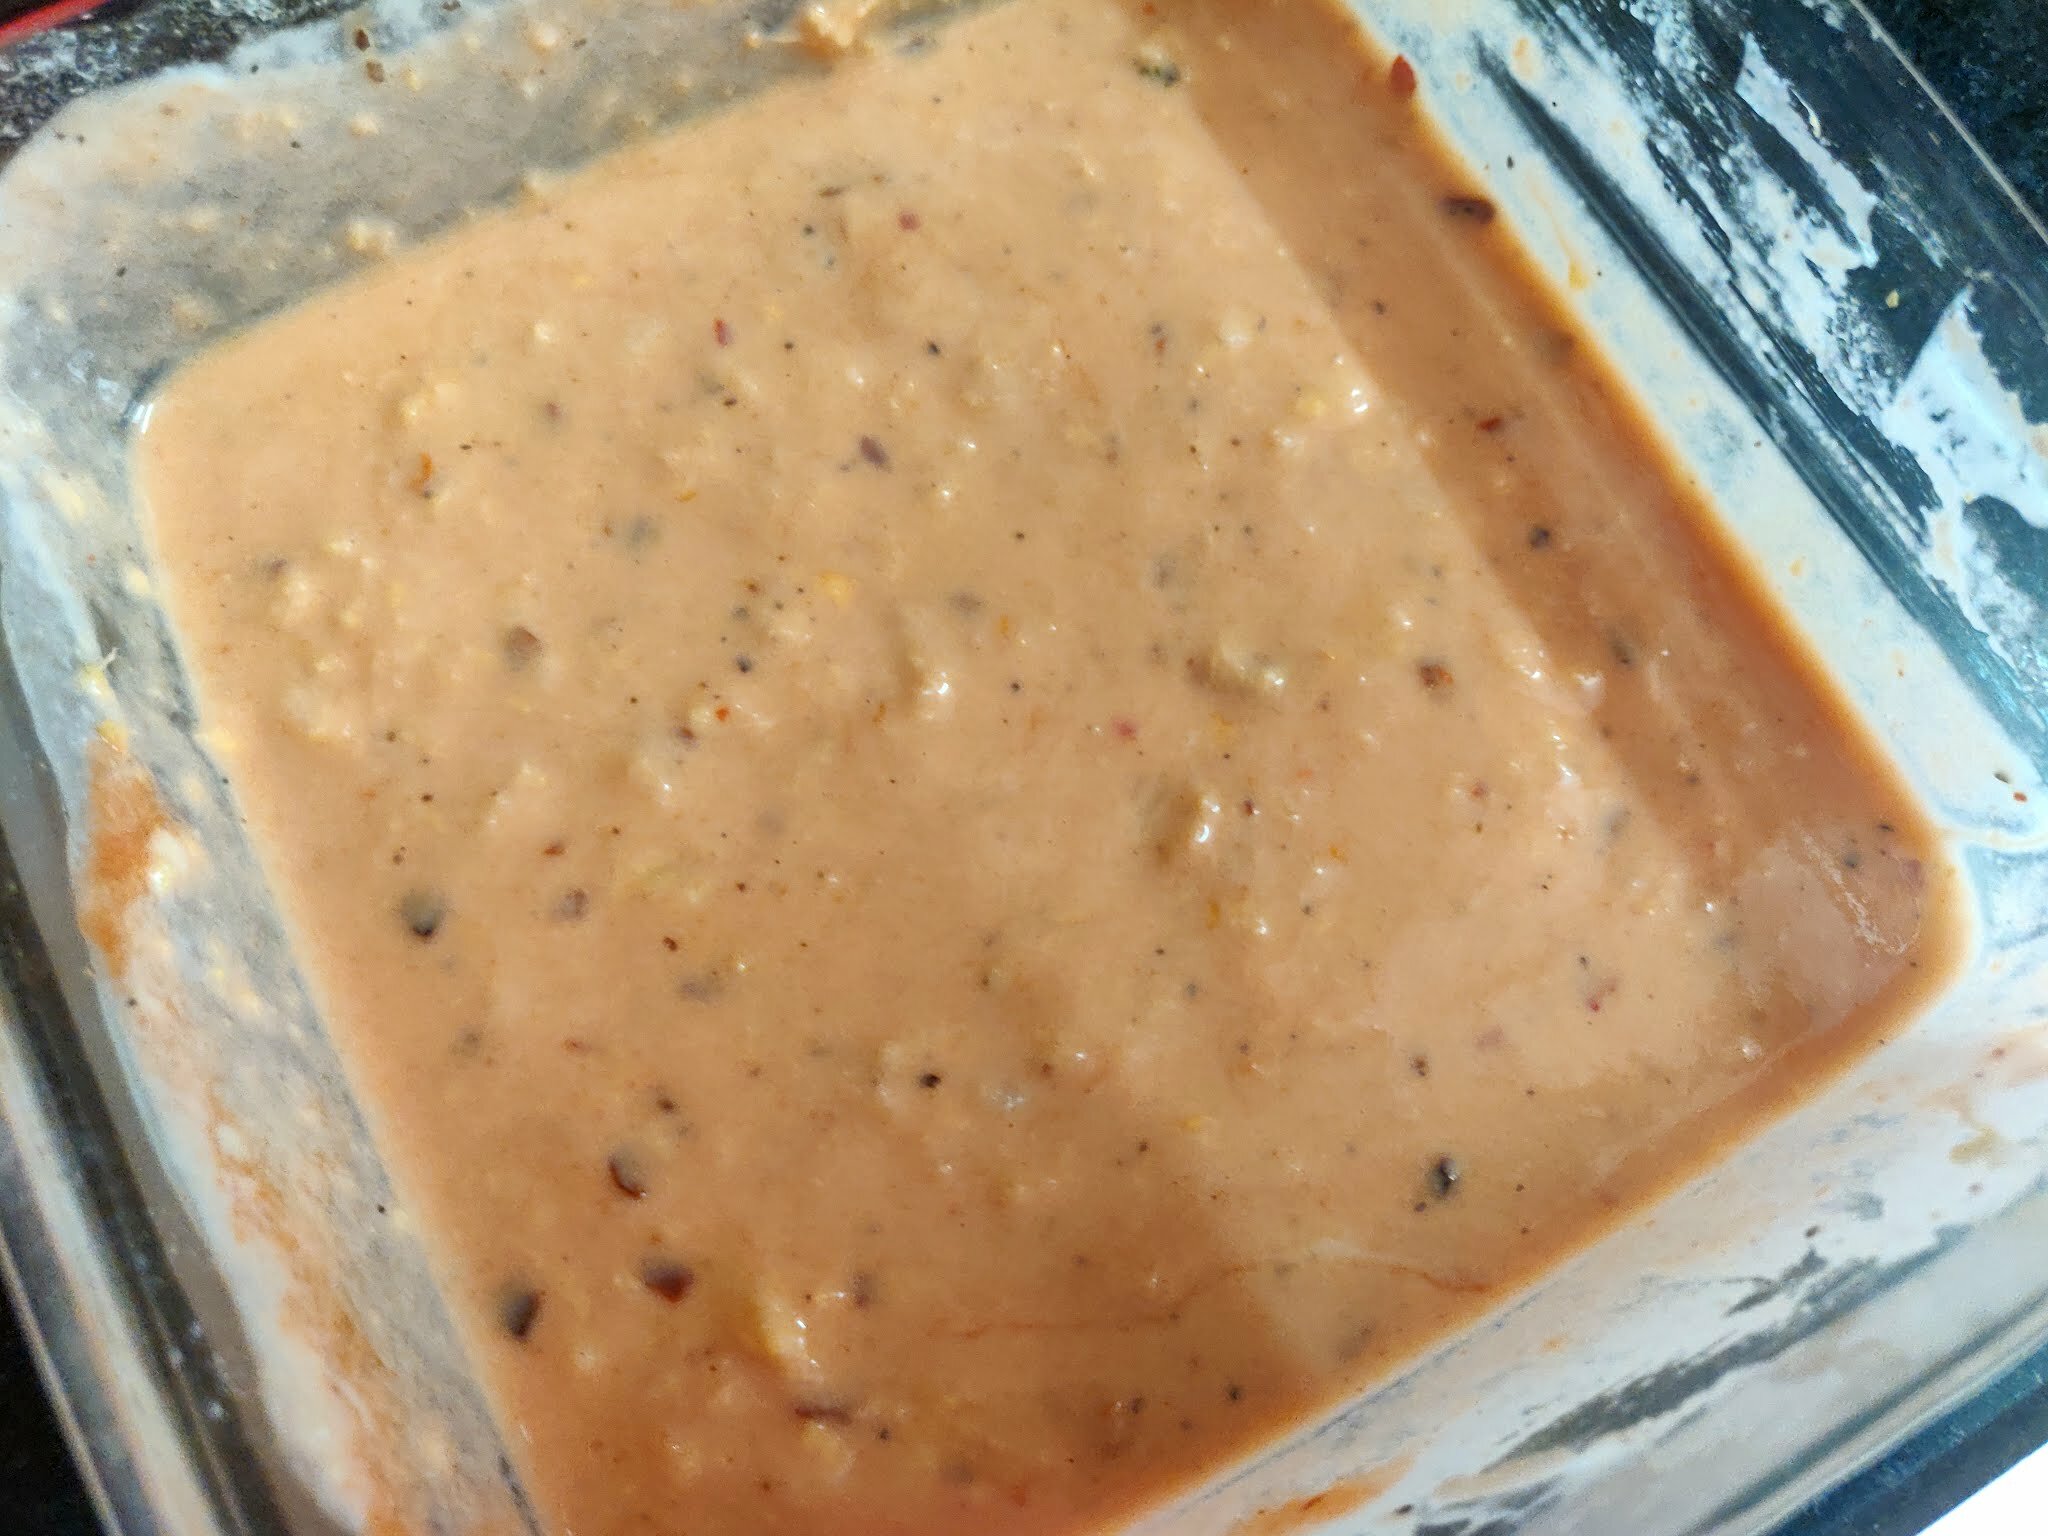 Mixing flour with sauces and spices to make batter.